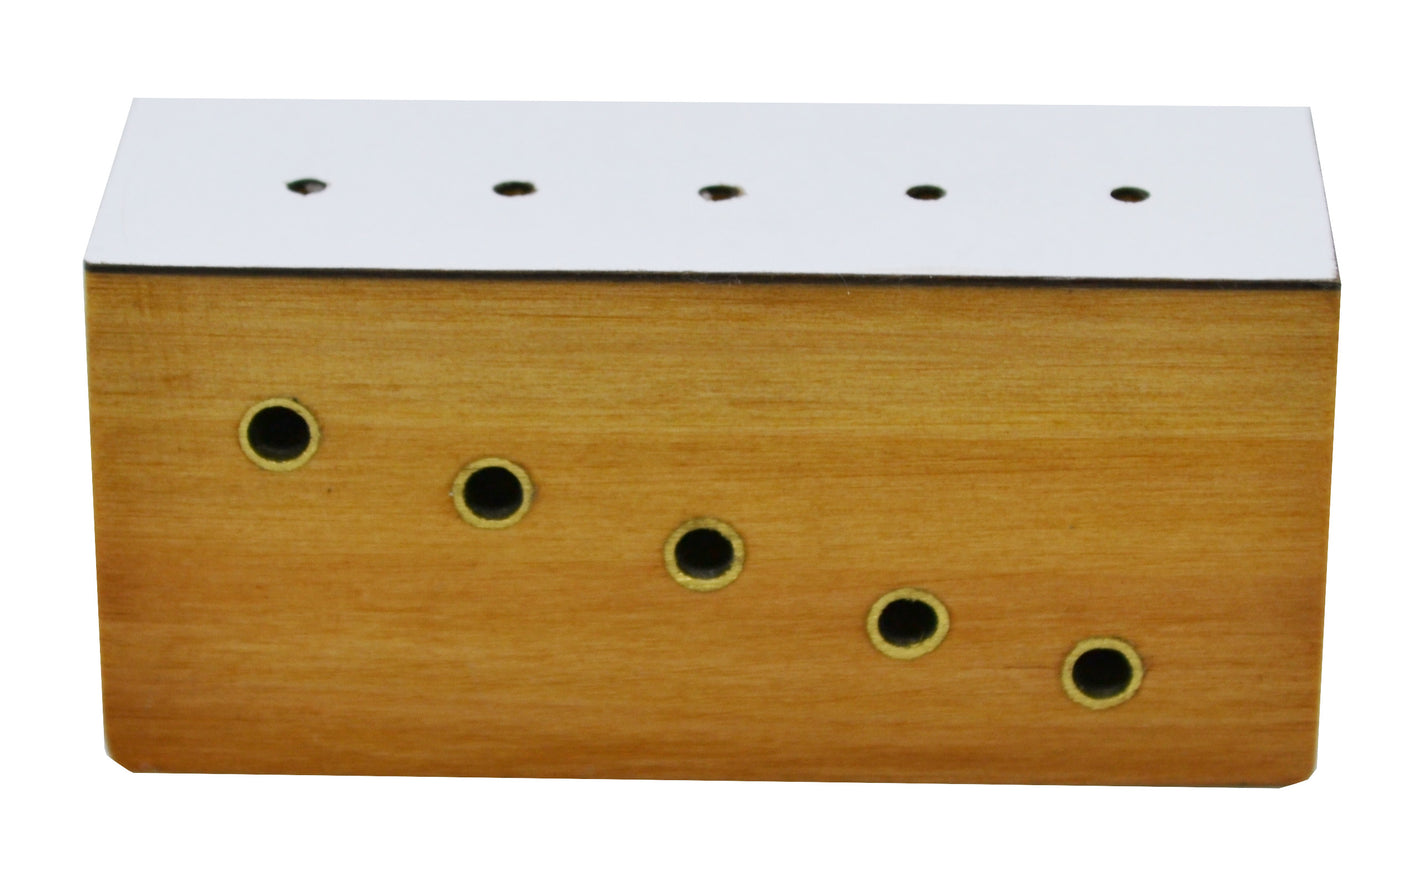 6 units of Hardwood Insect Pinning Block, Contains 5 Holes with Different Heights for Pins